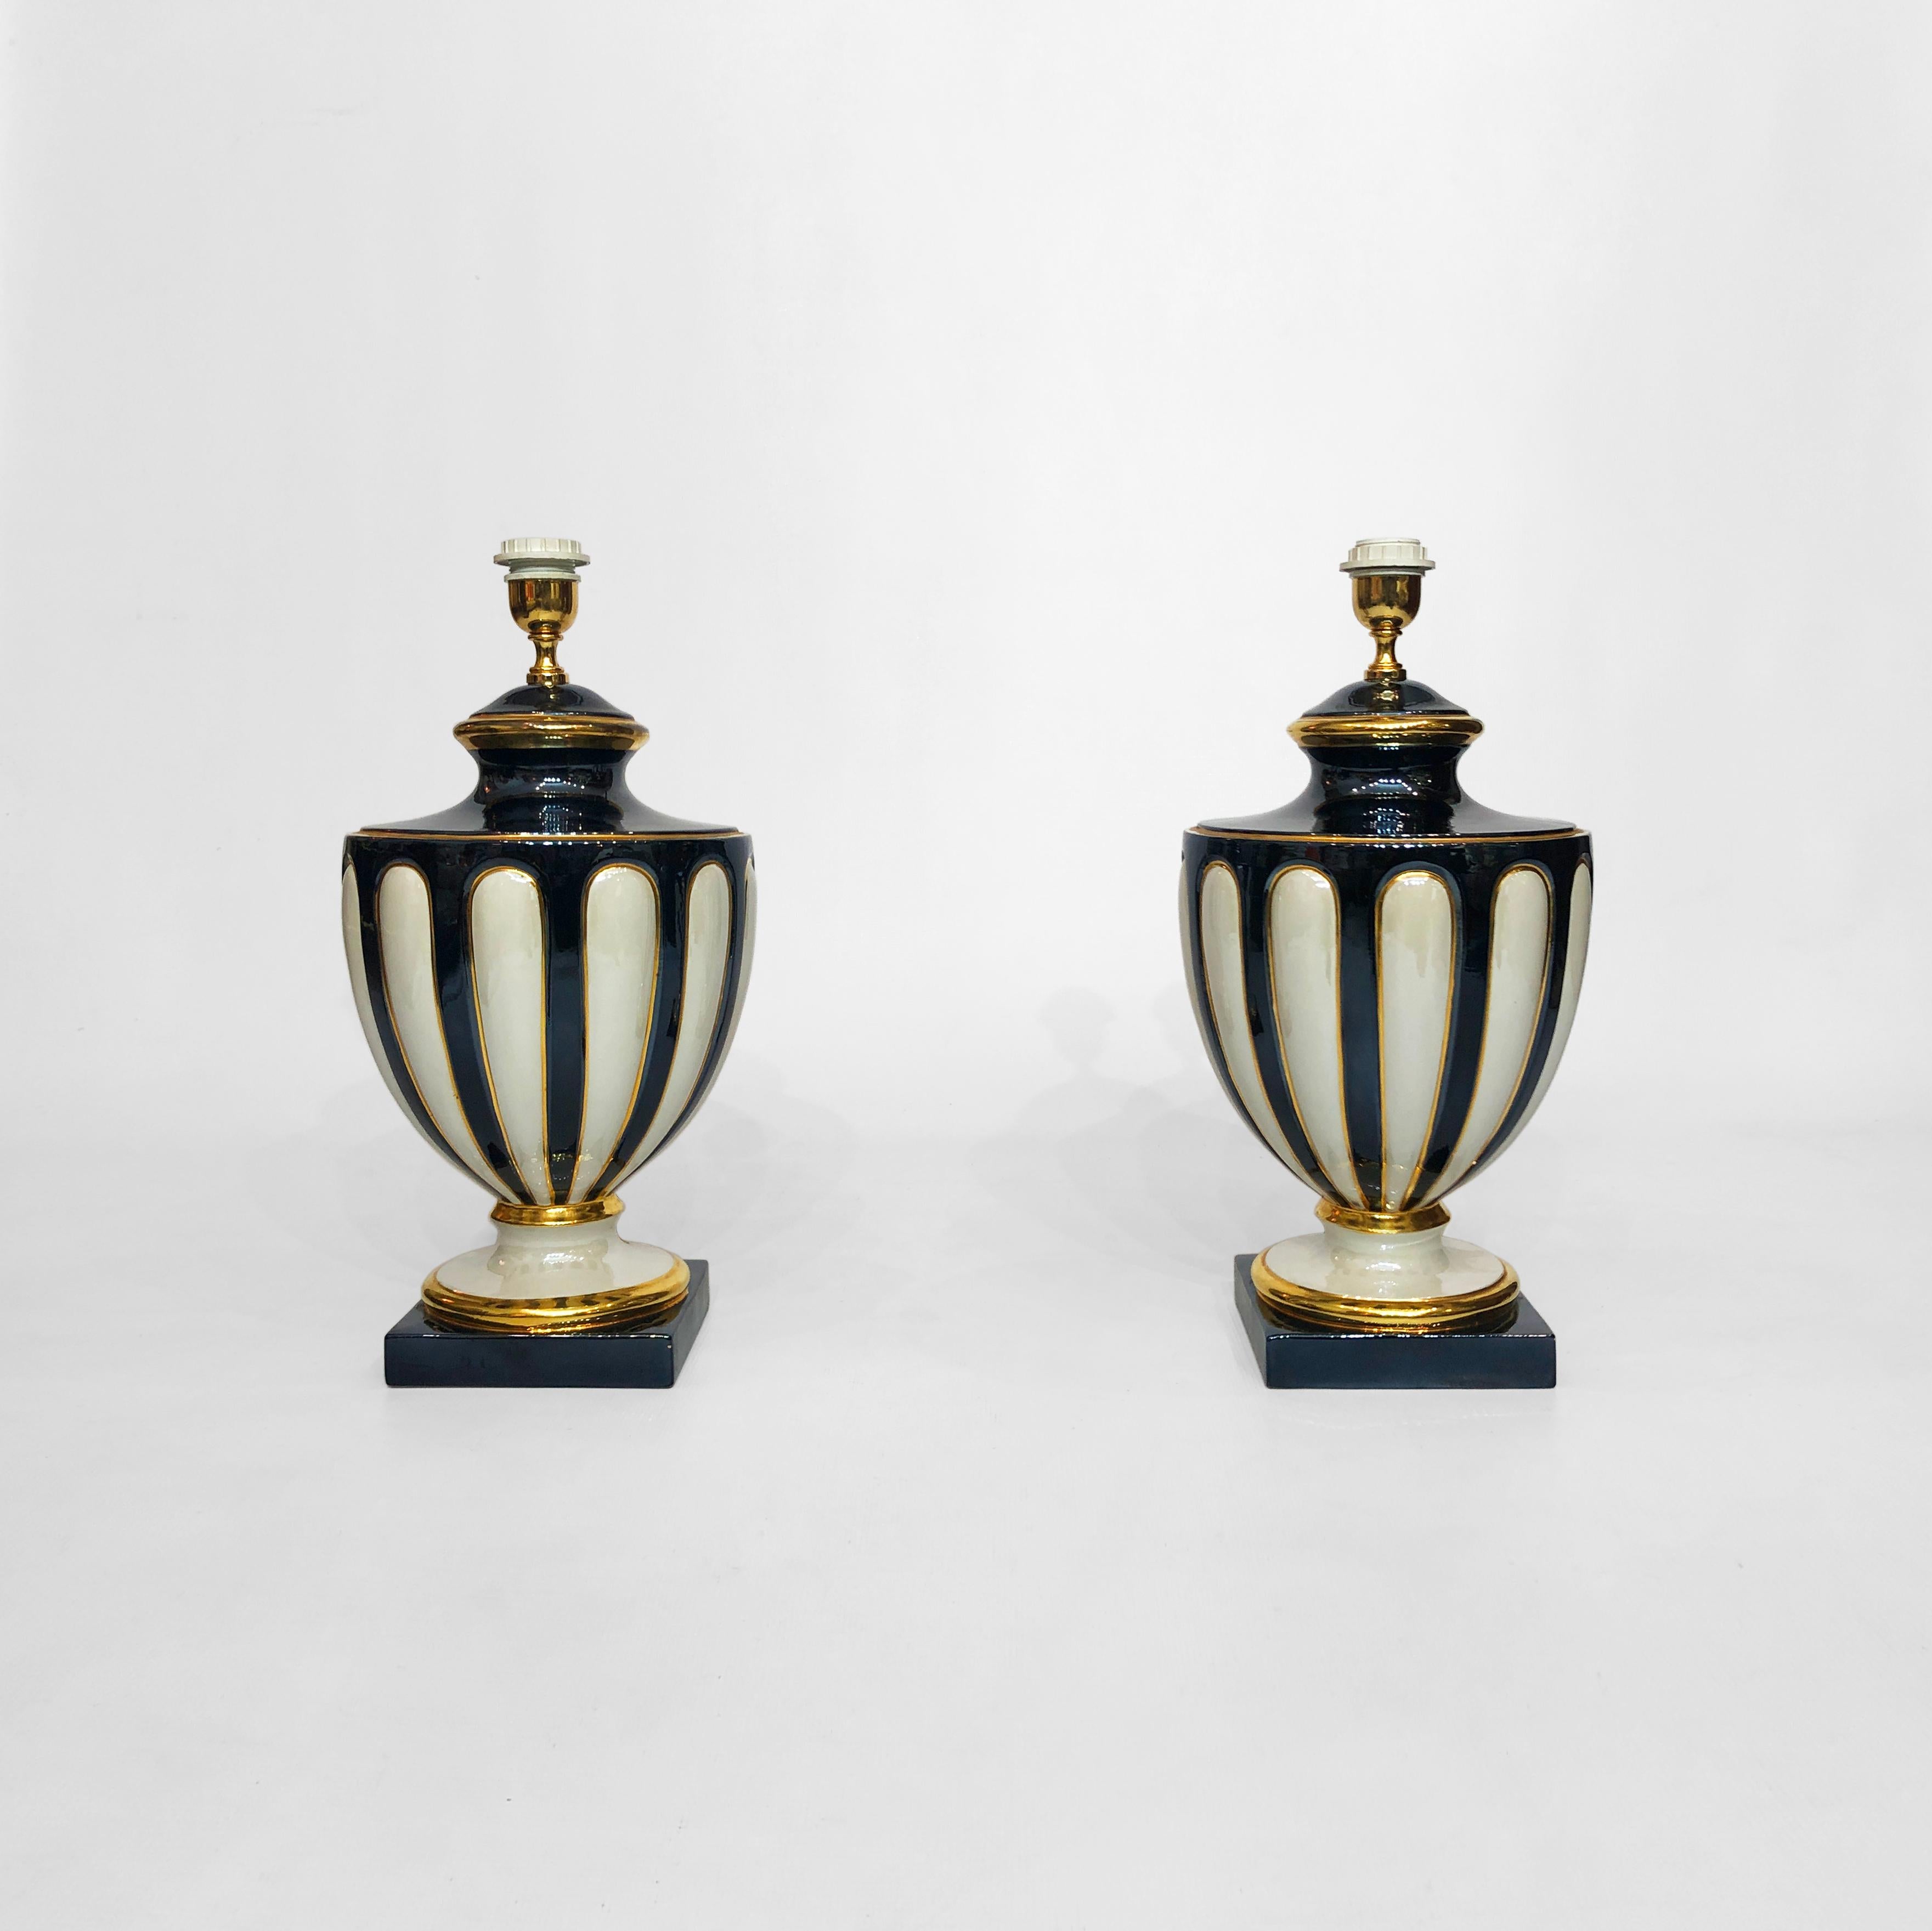 Late 20th Century Ceramic Italian Neoclassical Table Lamps 1970s Vintage Hollywood Regency 